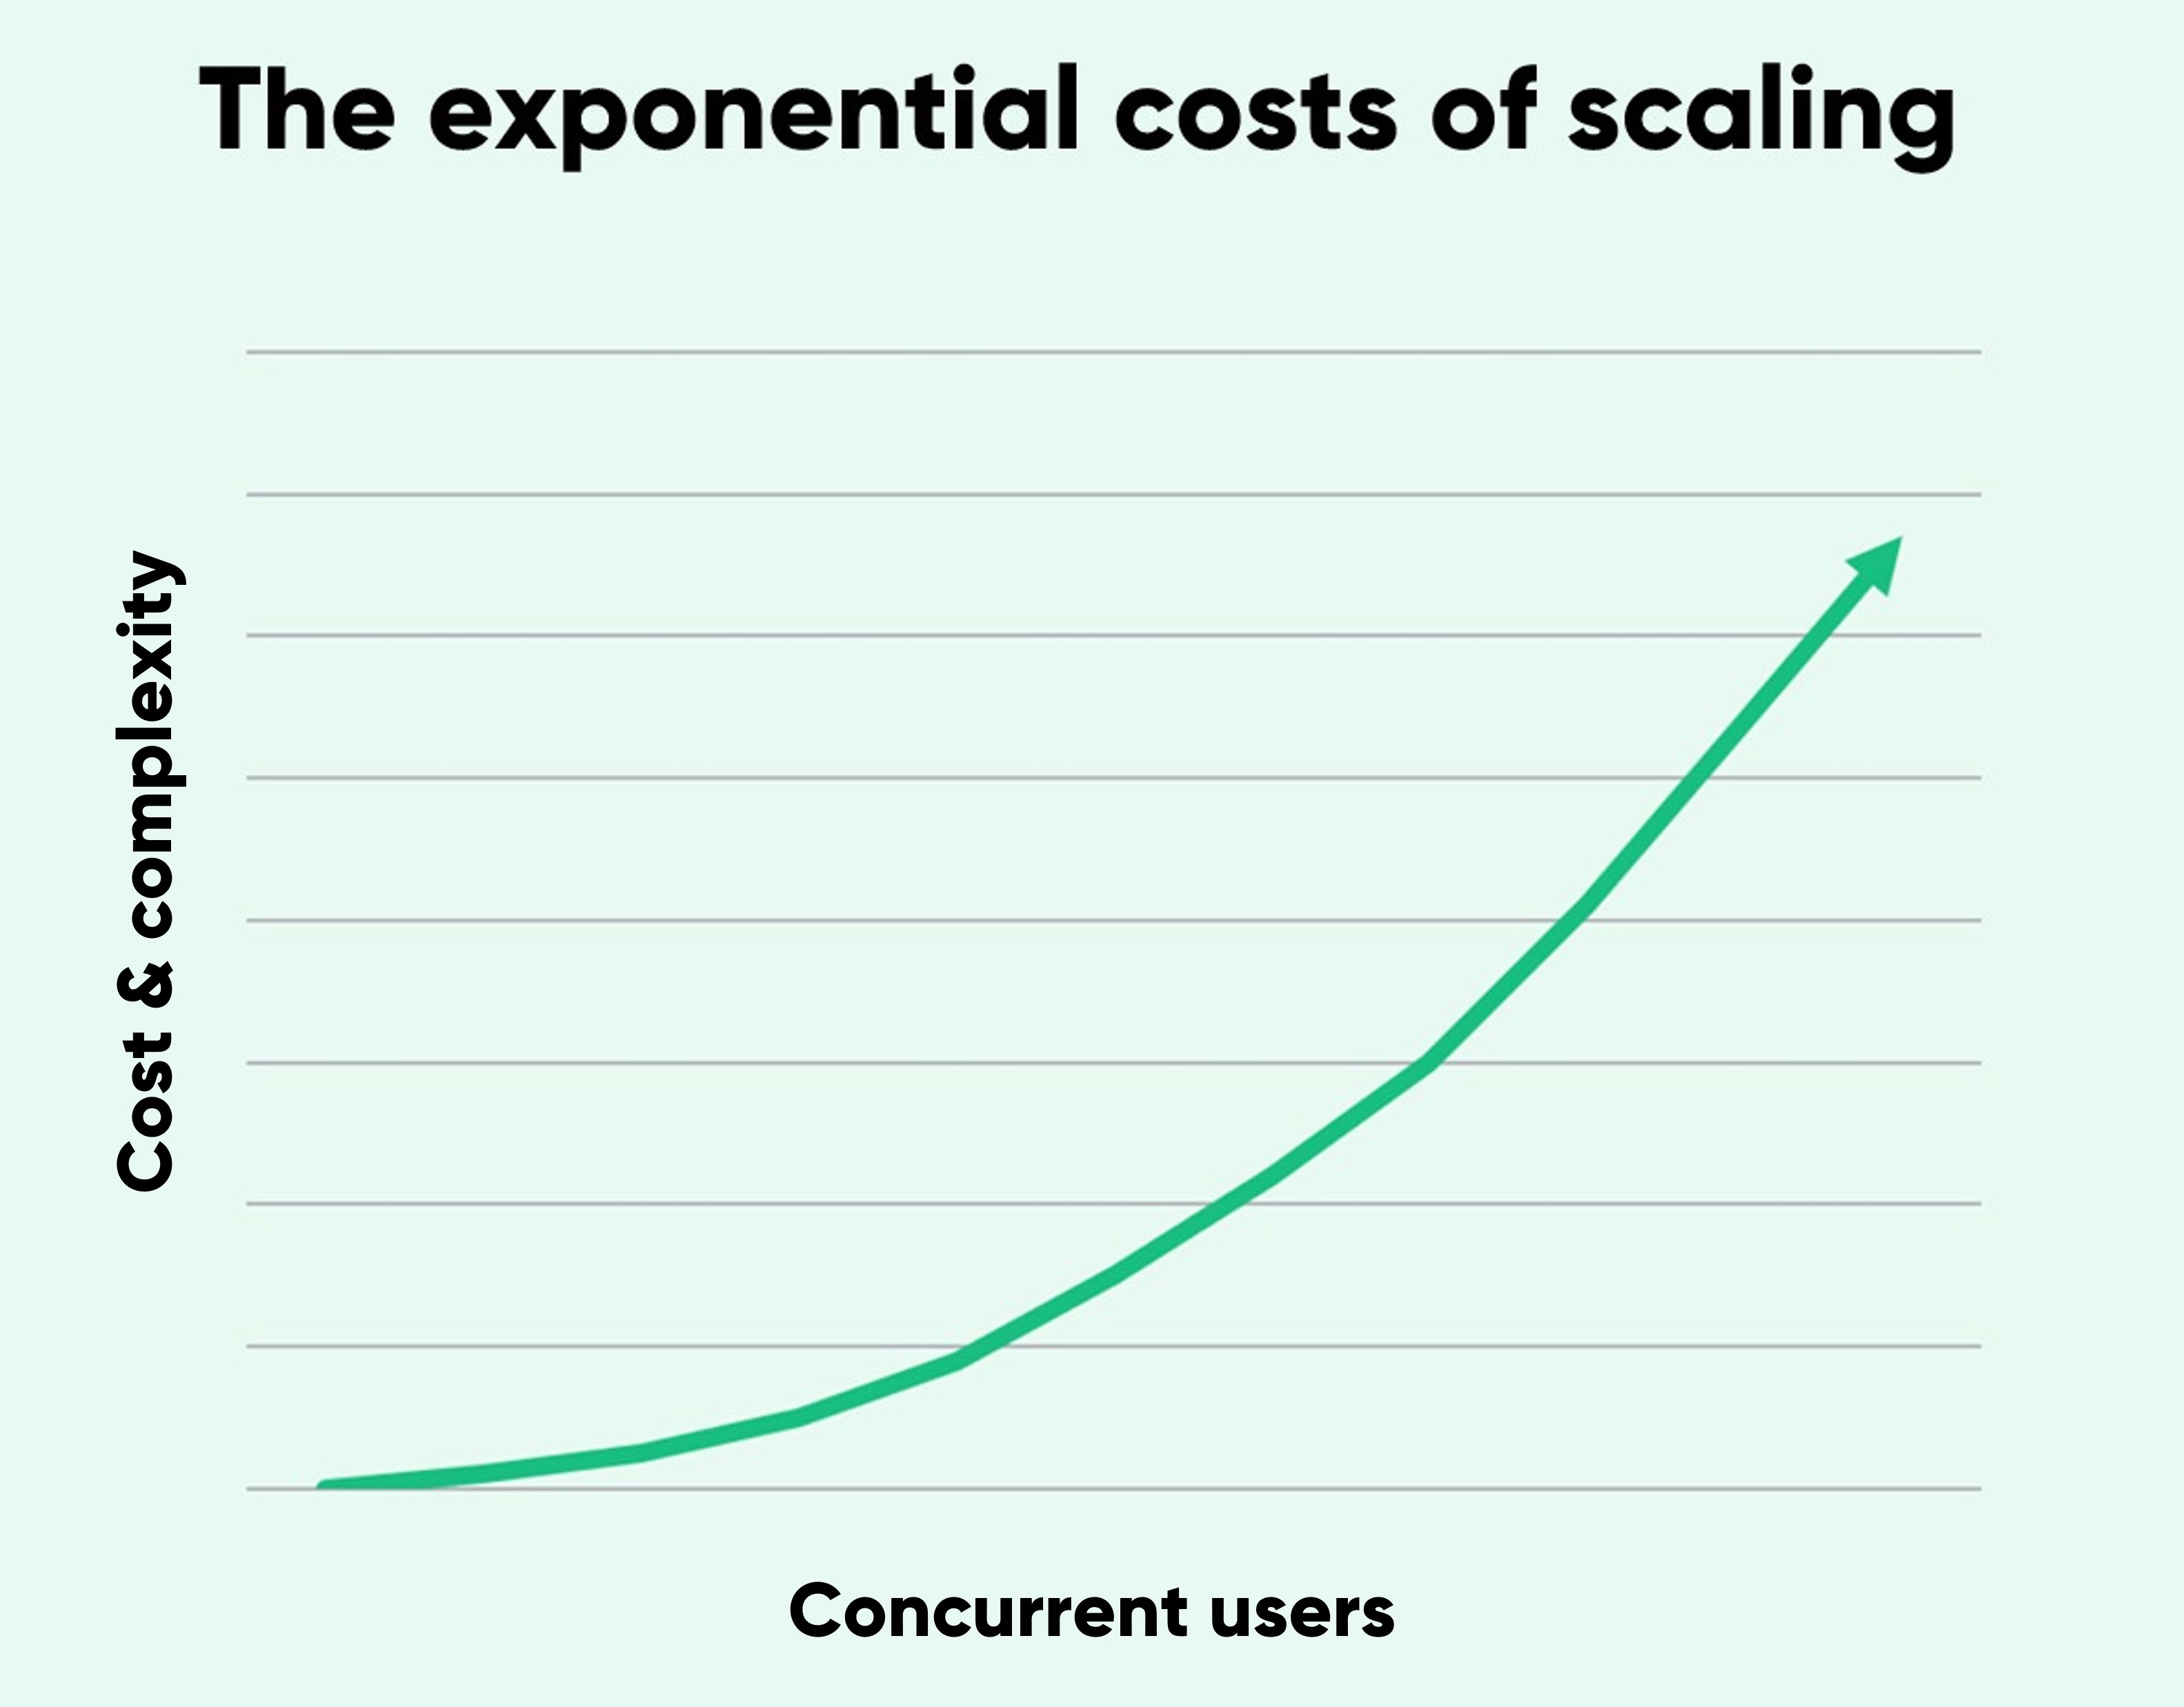 Exponential costs of scaling